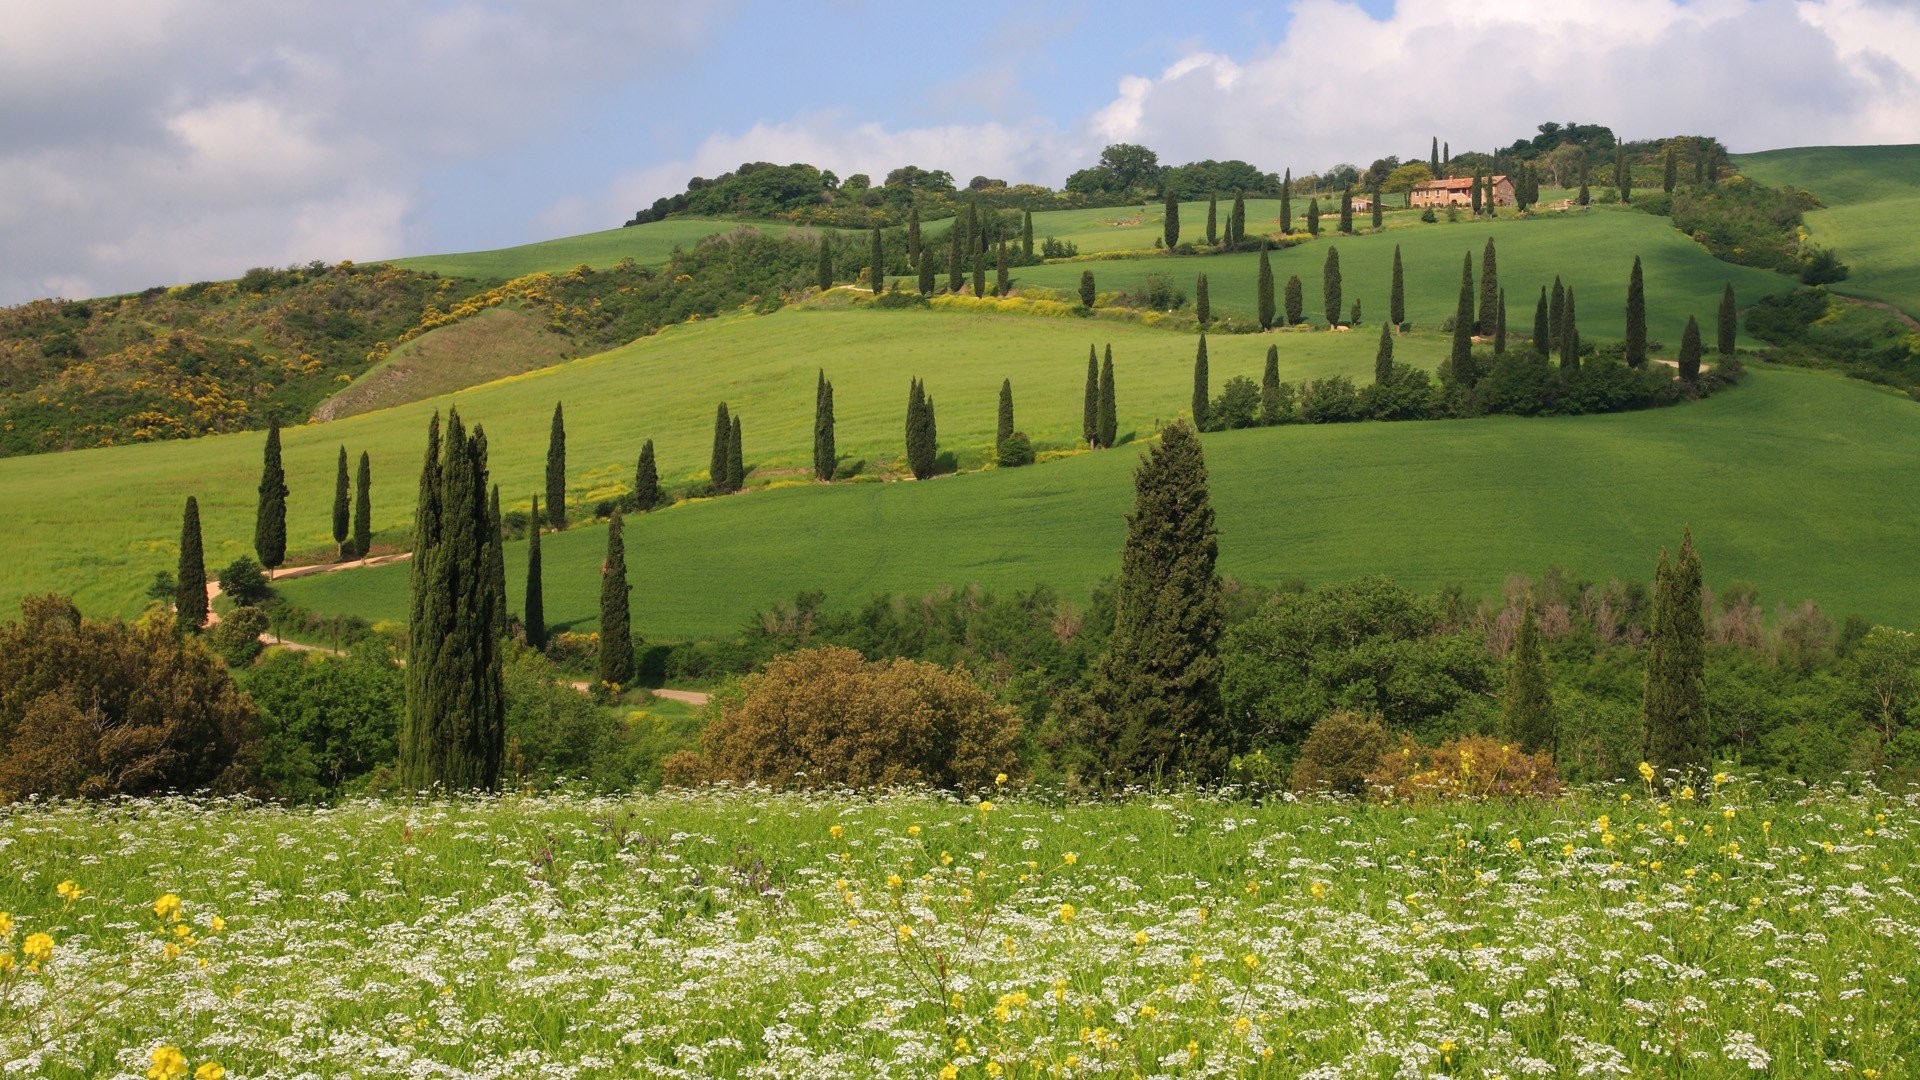 Tuscany,colourful, Iphone, Hills, Pienza, Siena, Mobile - Tuscany Italy , HD Wallpaper & Backgrounds